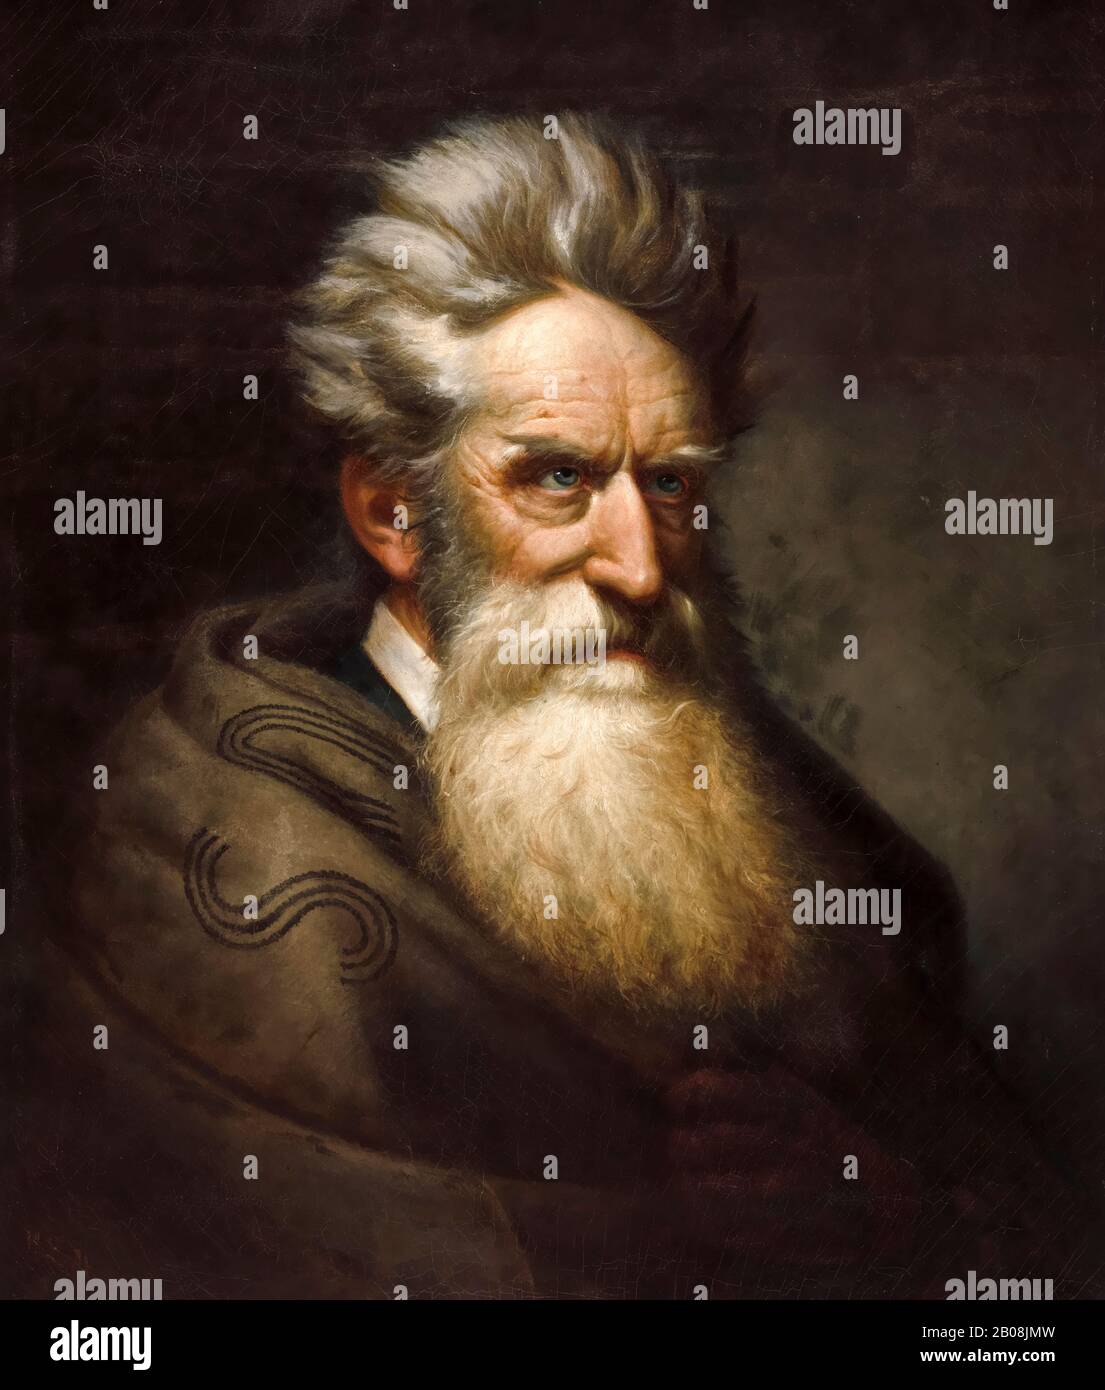 John Brown (1800-1859), Slave Trade Abolitionist, portrait painting by Ole Peter Hansen Balling, 1872 Stock Photo